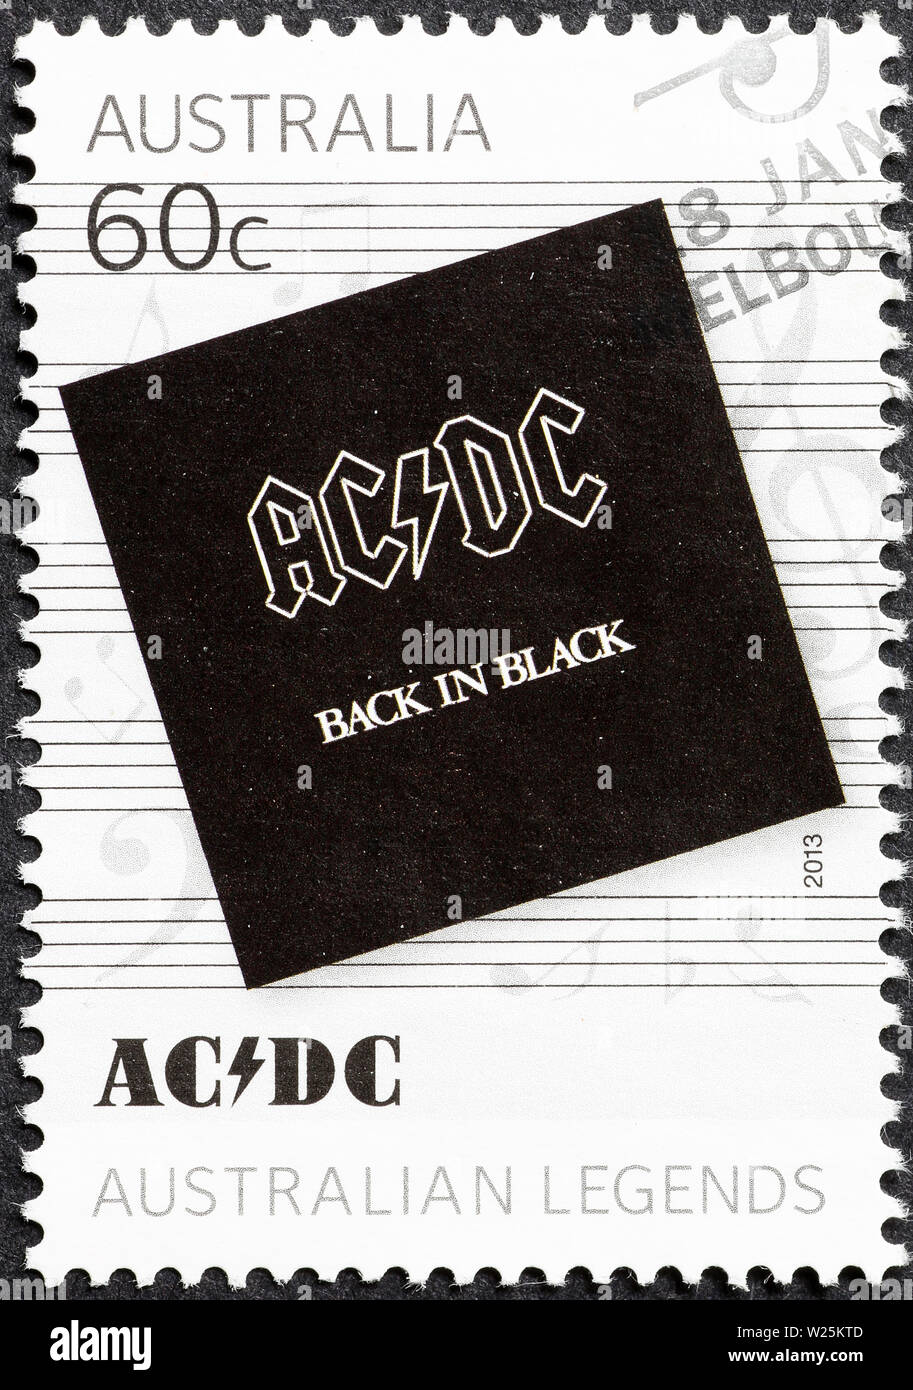 Back in black by AC-DC on australian postage stamp Stock Photo